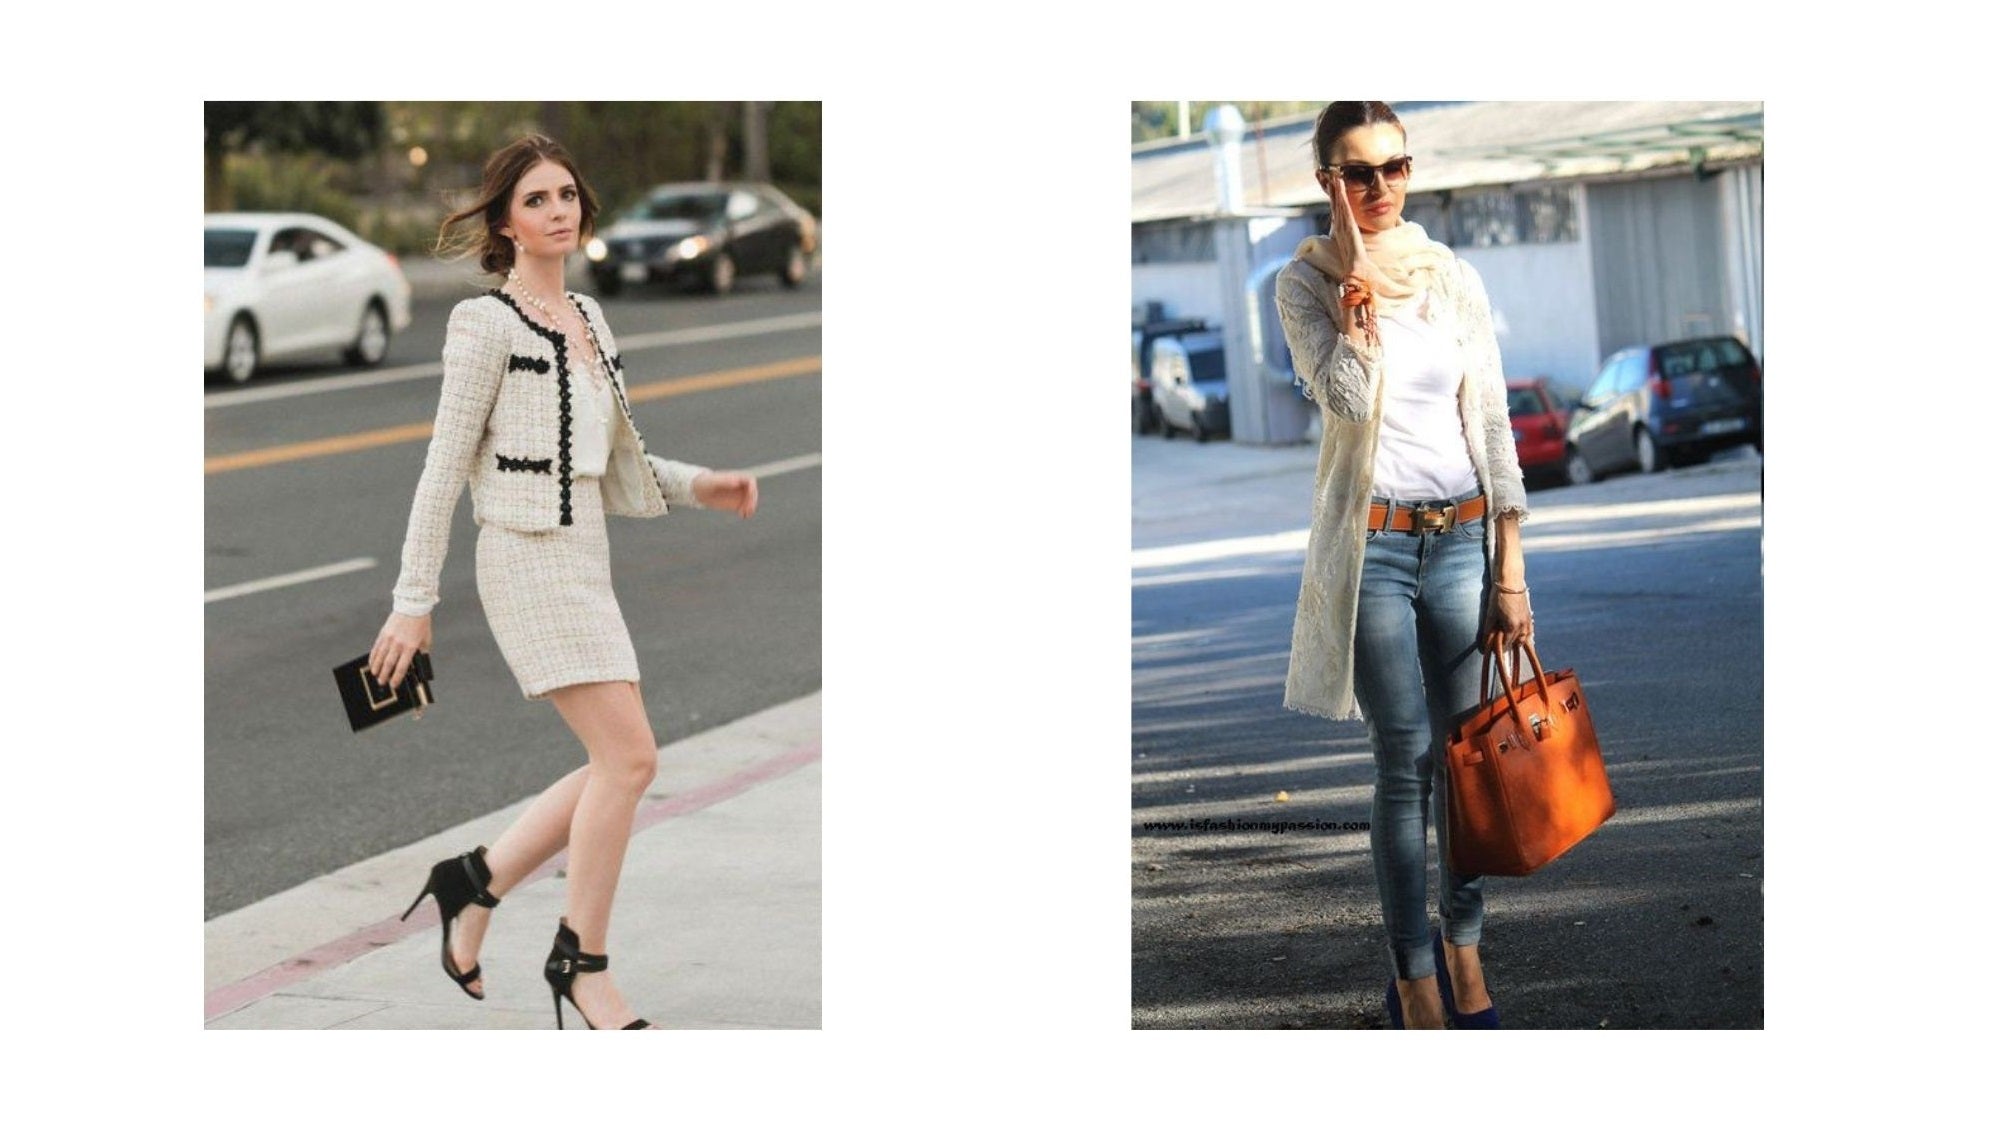 Which Brand Is Better: Chanel vs Hermes | Bagaholic